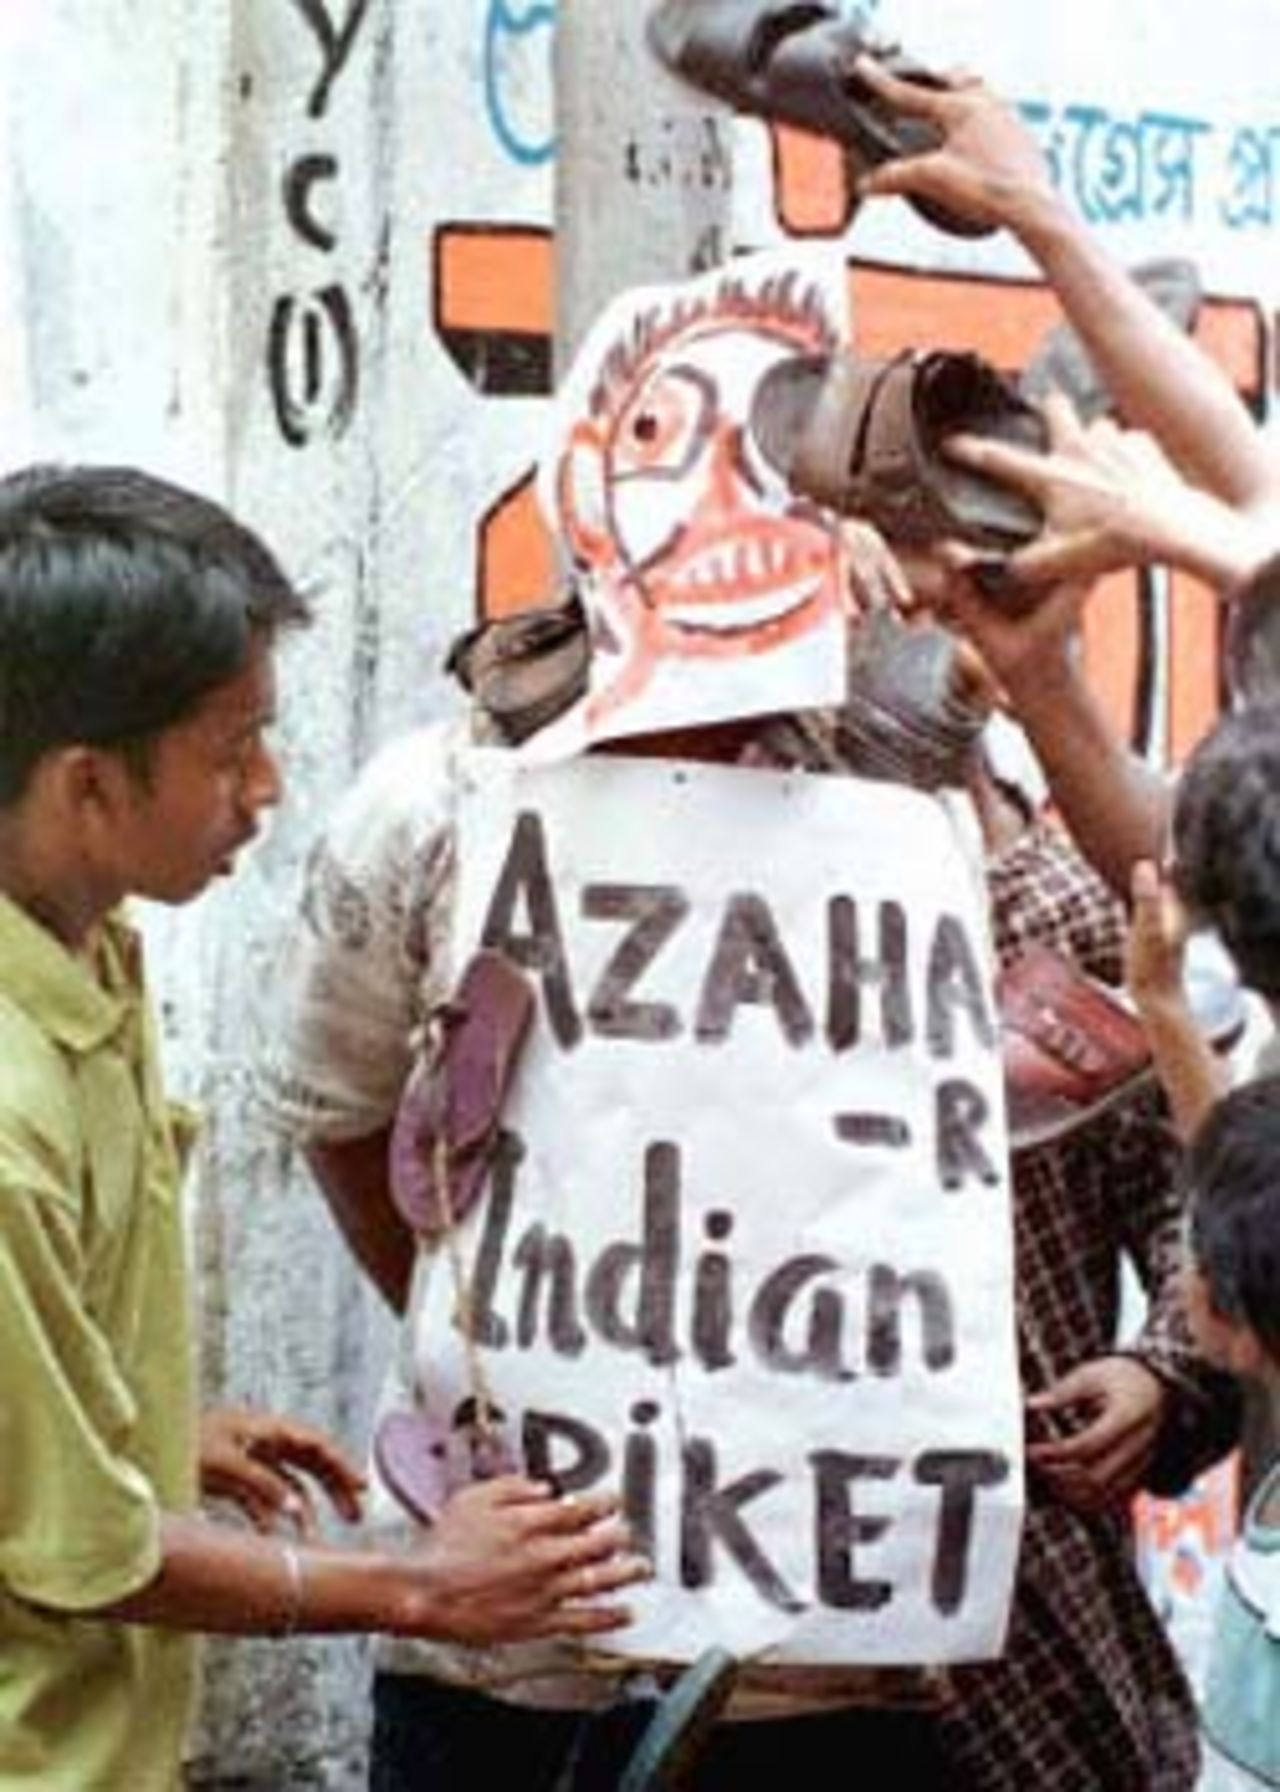 Indian cricket enthusiasts beat a likeness of former captain Mohammad Azharuddin during a demonstration 16 June 2000 following allegations of match fixing leveled against him by disgraced South African cricket captain Hansie Cronje. Azharuddin has denied any